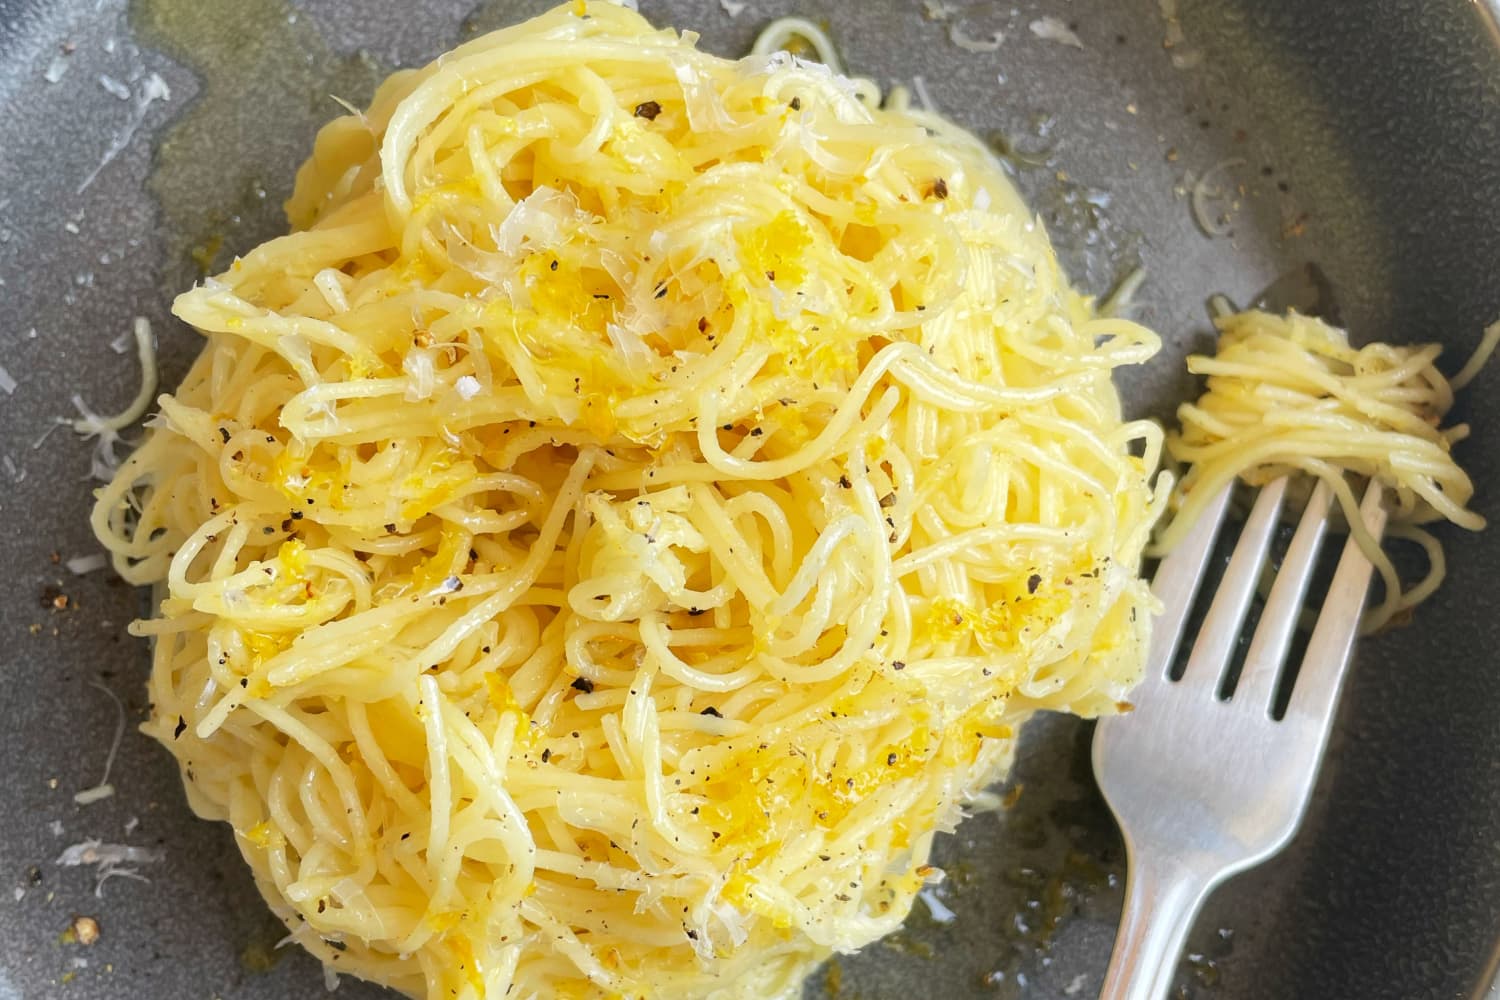 I Tried The Pasta Queen’s “Lemon Temptress Pasta” and It’s Impossibly Simple and Delicious